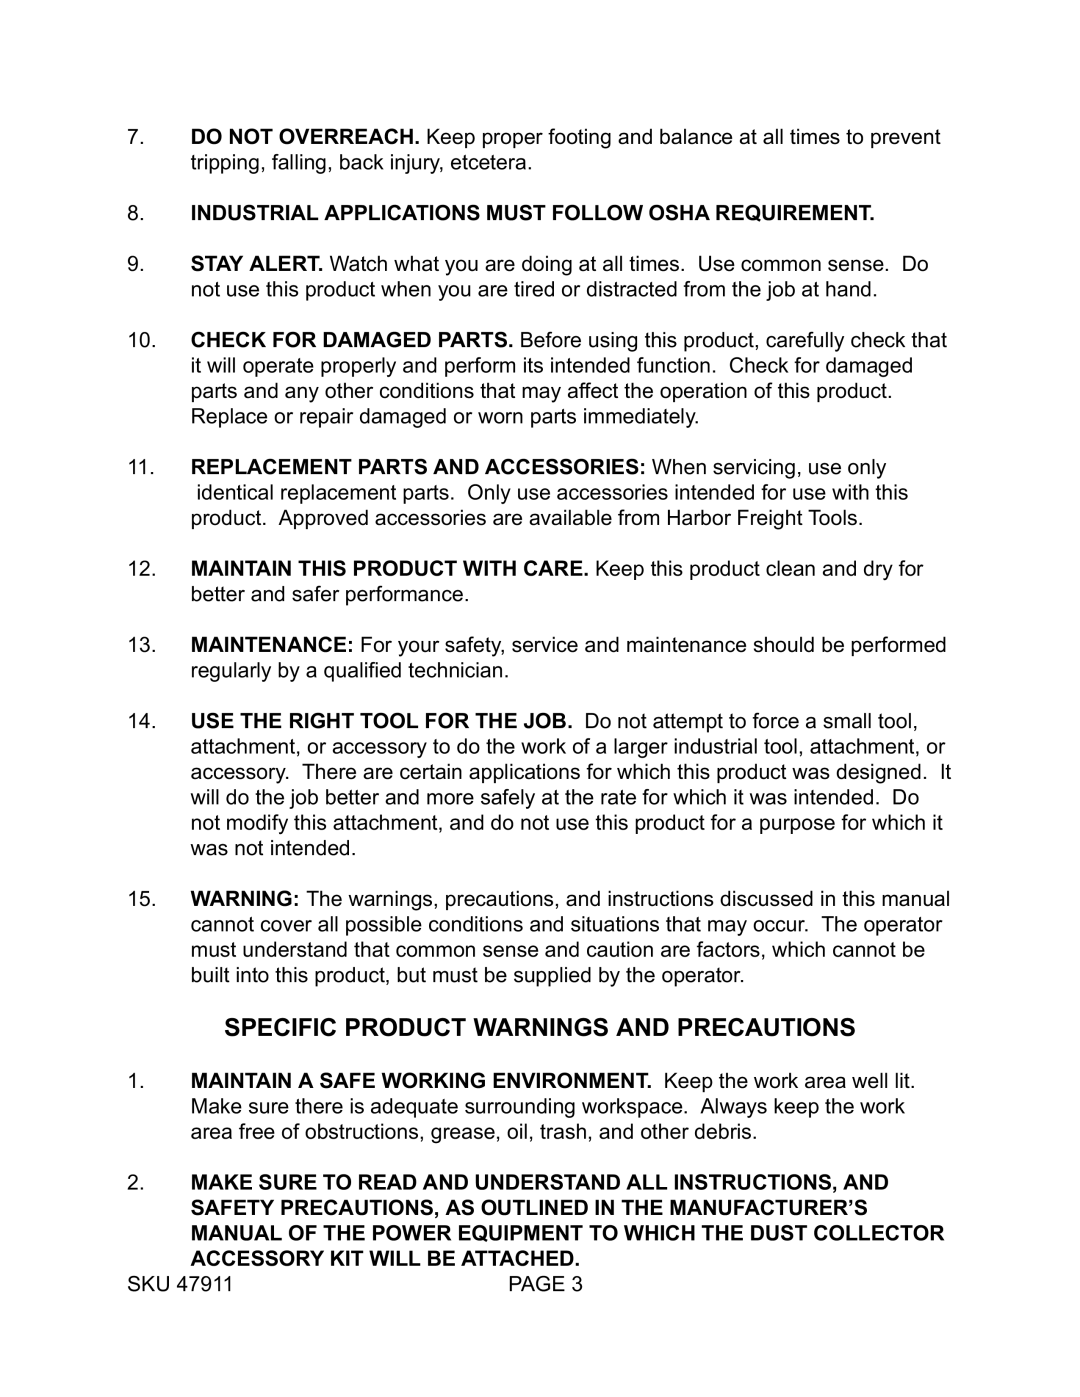 Harbor Freight Tools 47911 Specific Product Warnings and Precautions, Industrial Applications Must Follow Osha Requirement 